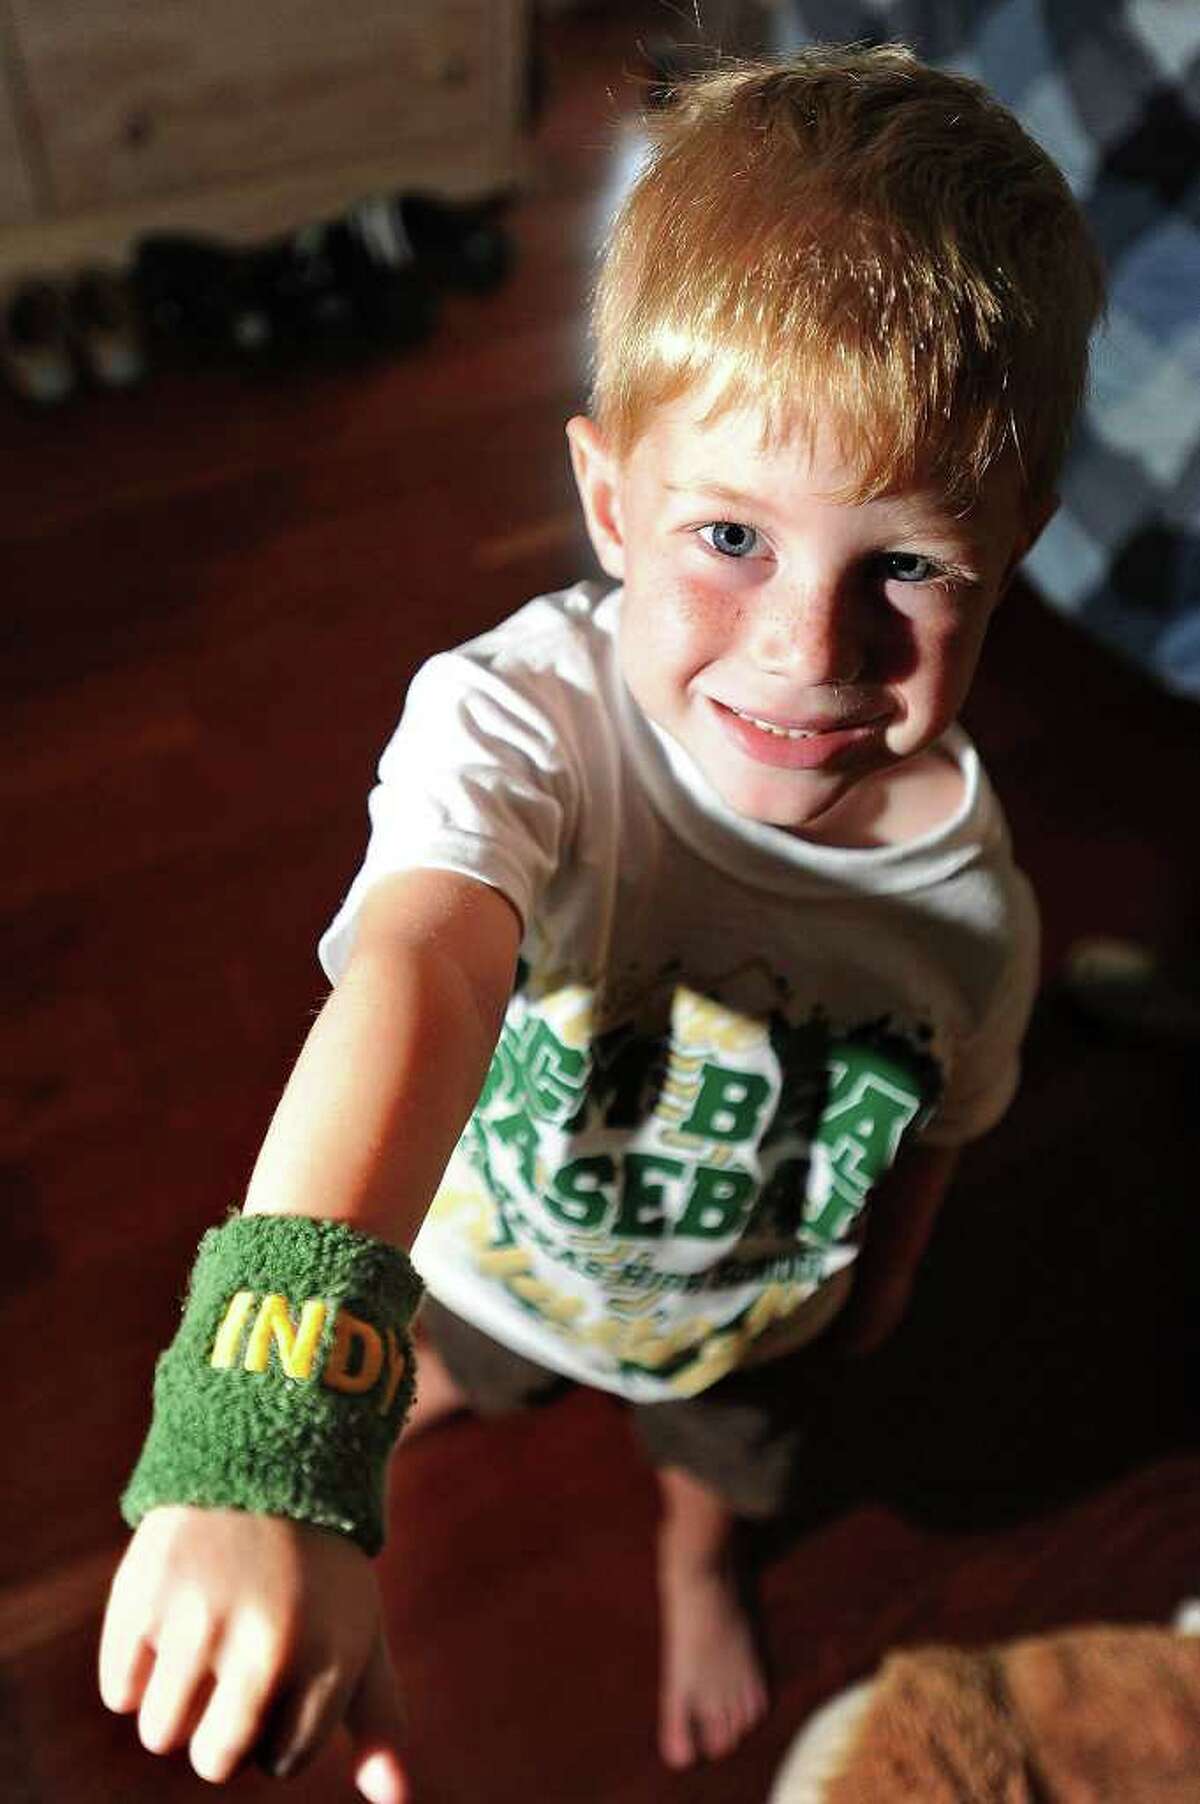 Although diagnosed with diffused infiltrated pontine glioma and told to have a diminutive life expectancy, Indy Parkhurst's spirit has earned him the title of unofficial mascot for LC-M's baseball team. In support, players have begun wearing green and gold wristbands, shown, labeled 'Indy'. Guiseppe Barranco/The Enterprise